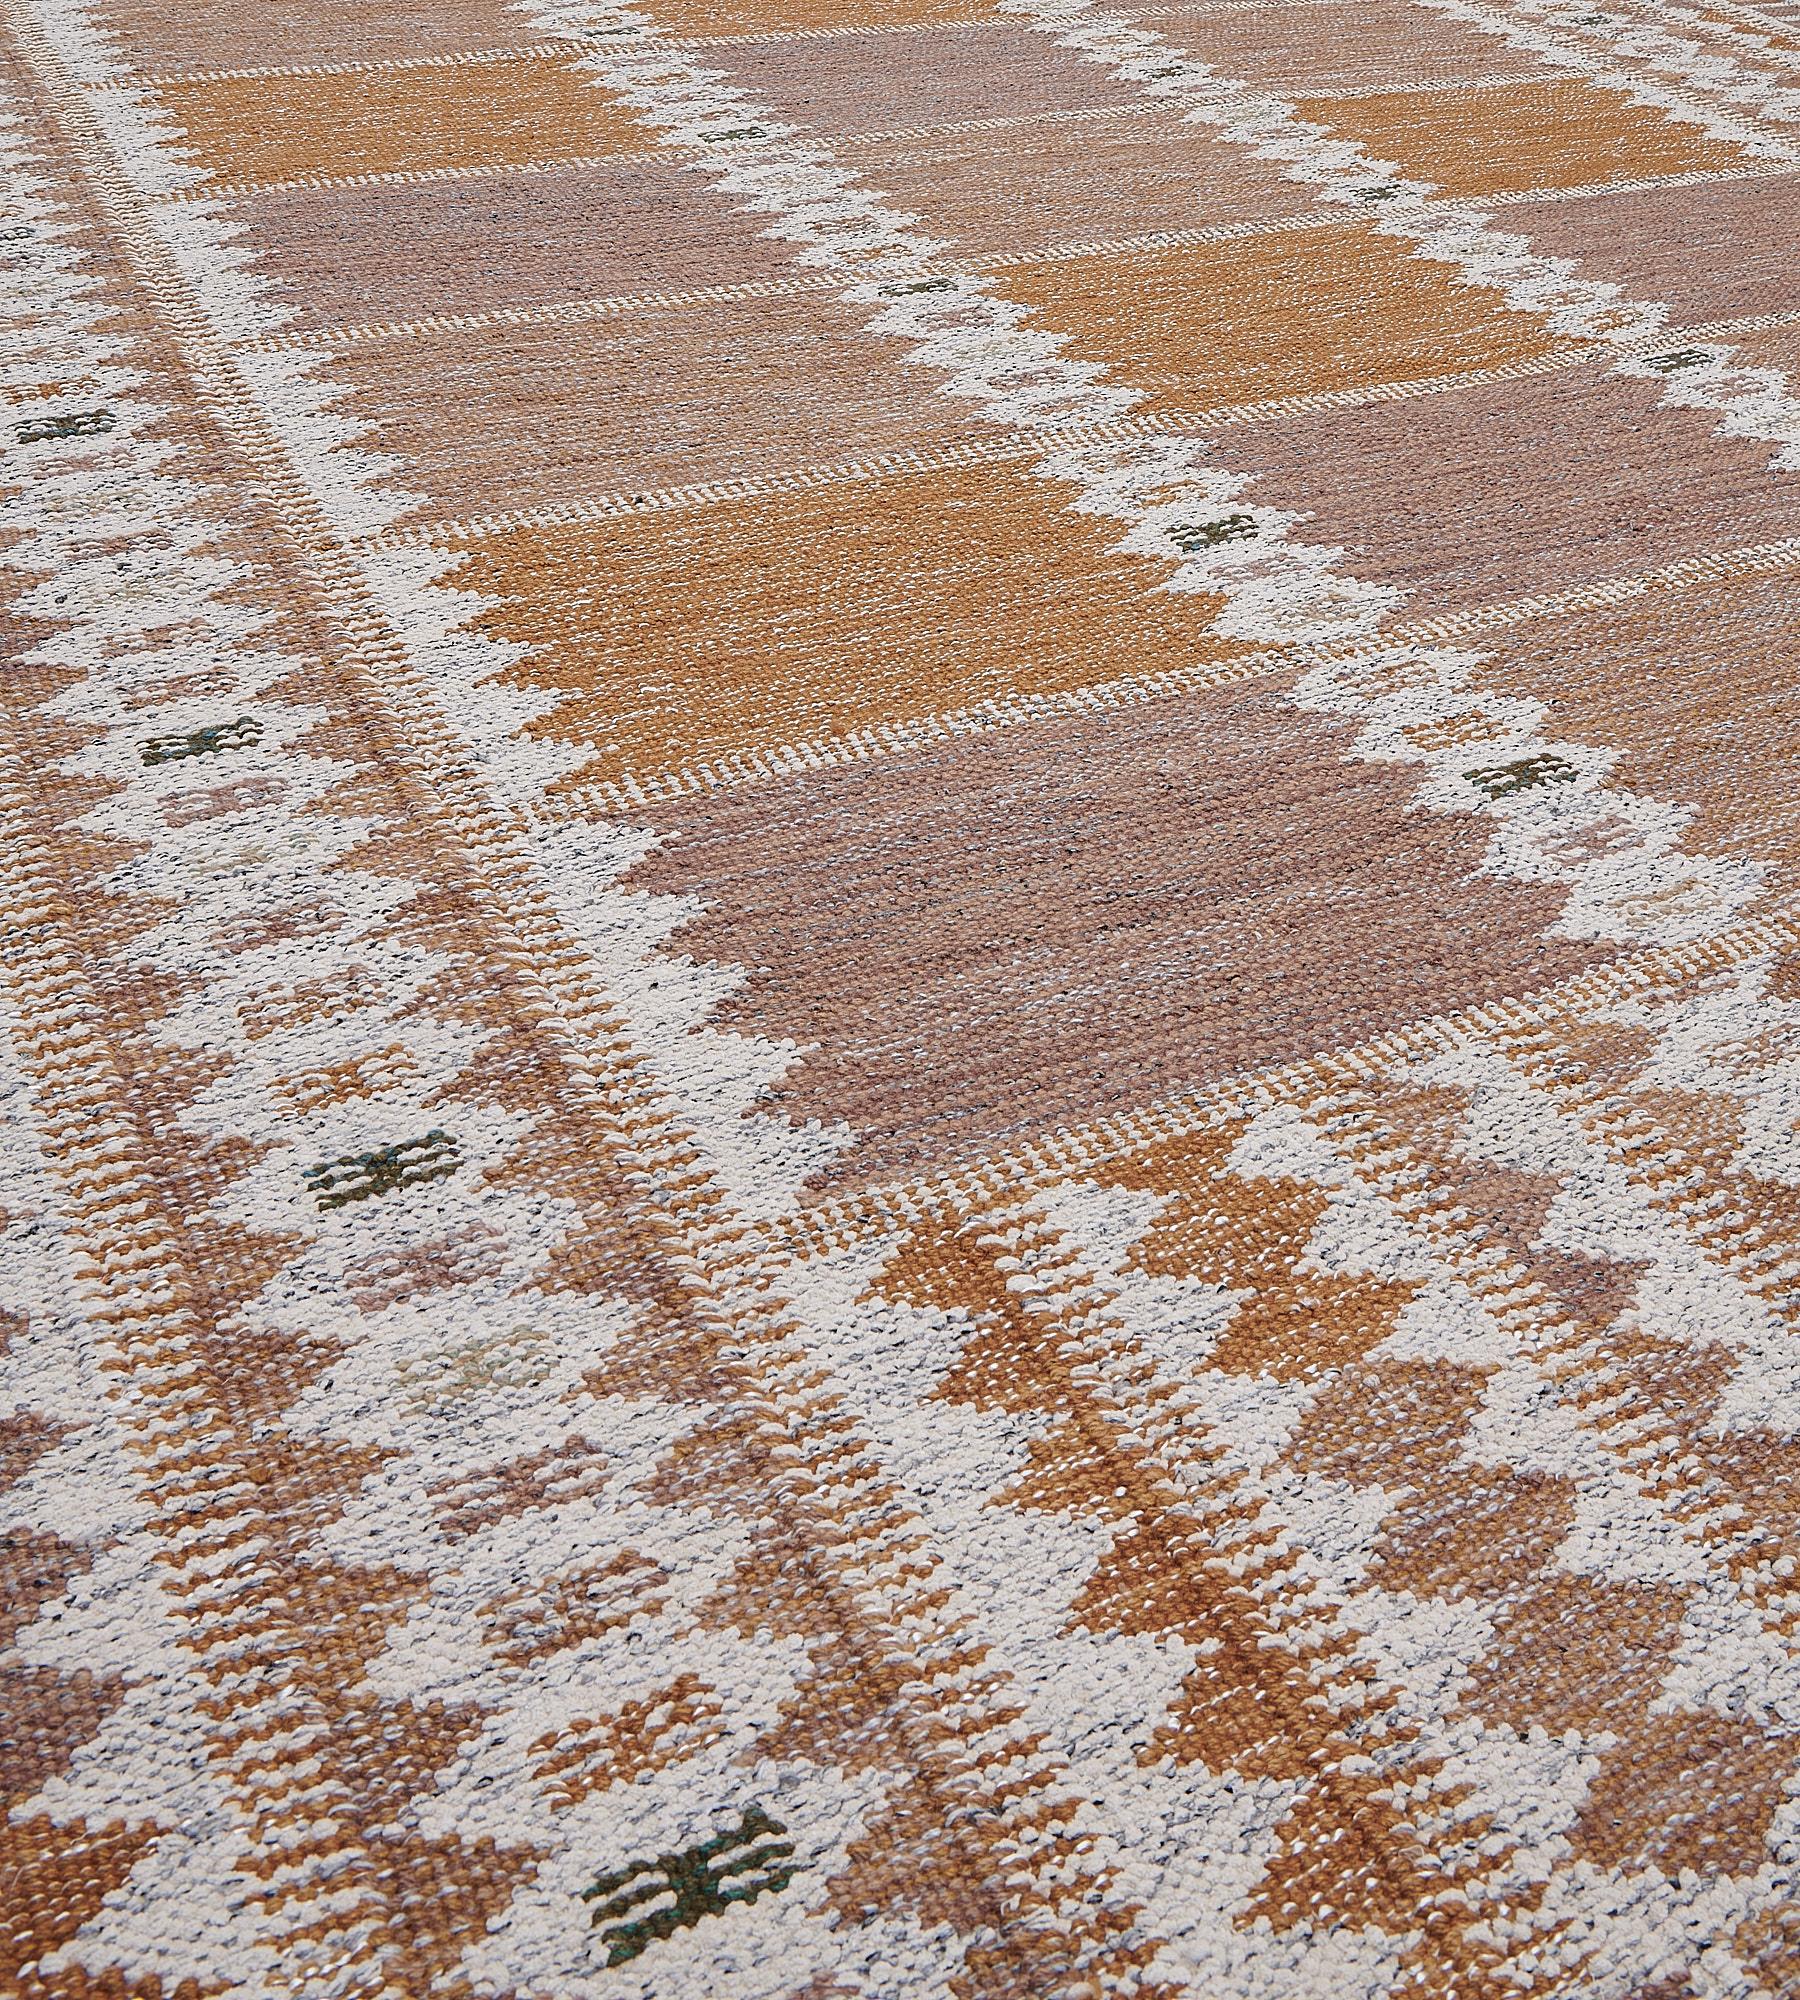 The Mansour Modern Swedish collection is primarily inspired by vintage Swedish flat-weave rugs whose geometric designs are relevant as ever in the 21st century. The collection utilizes a number of flat-weave techniques, yielding various distinctive